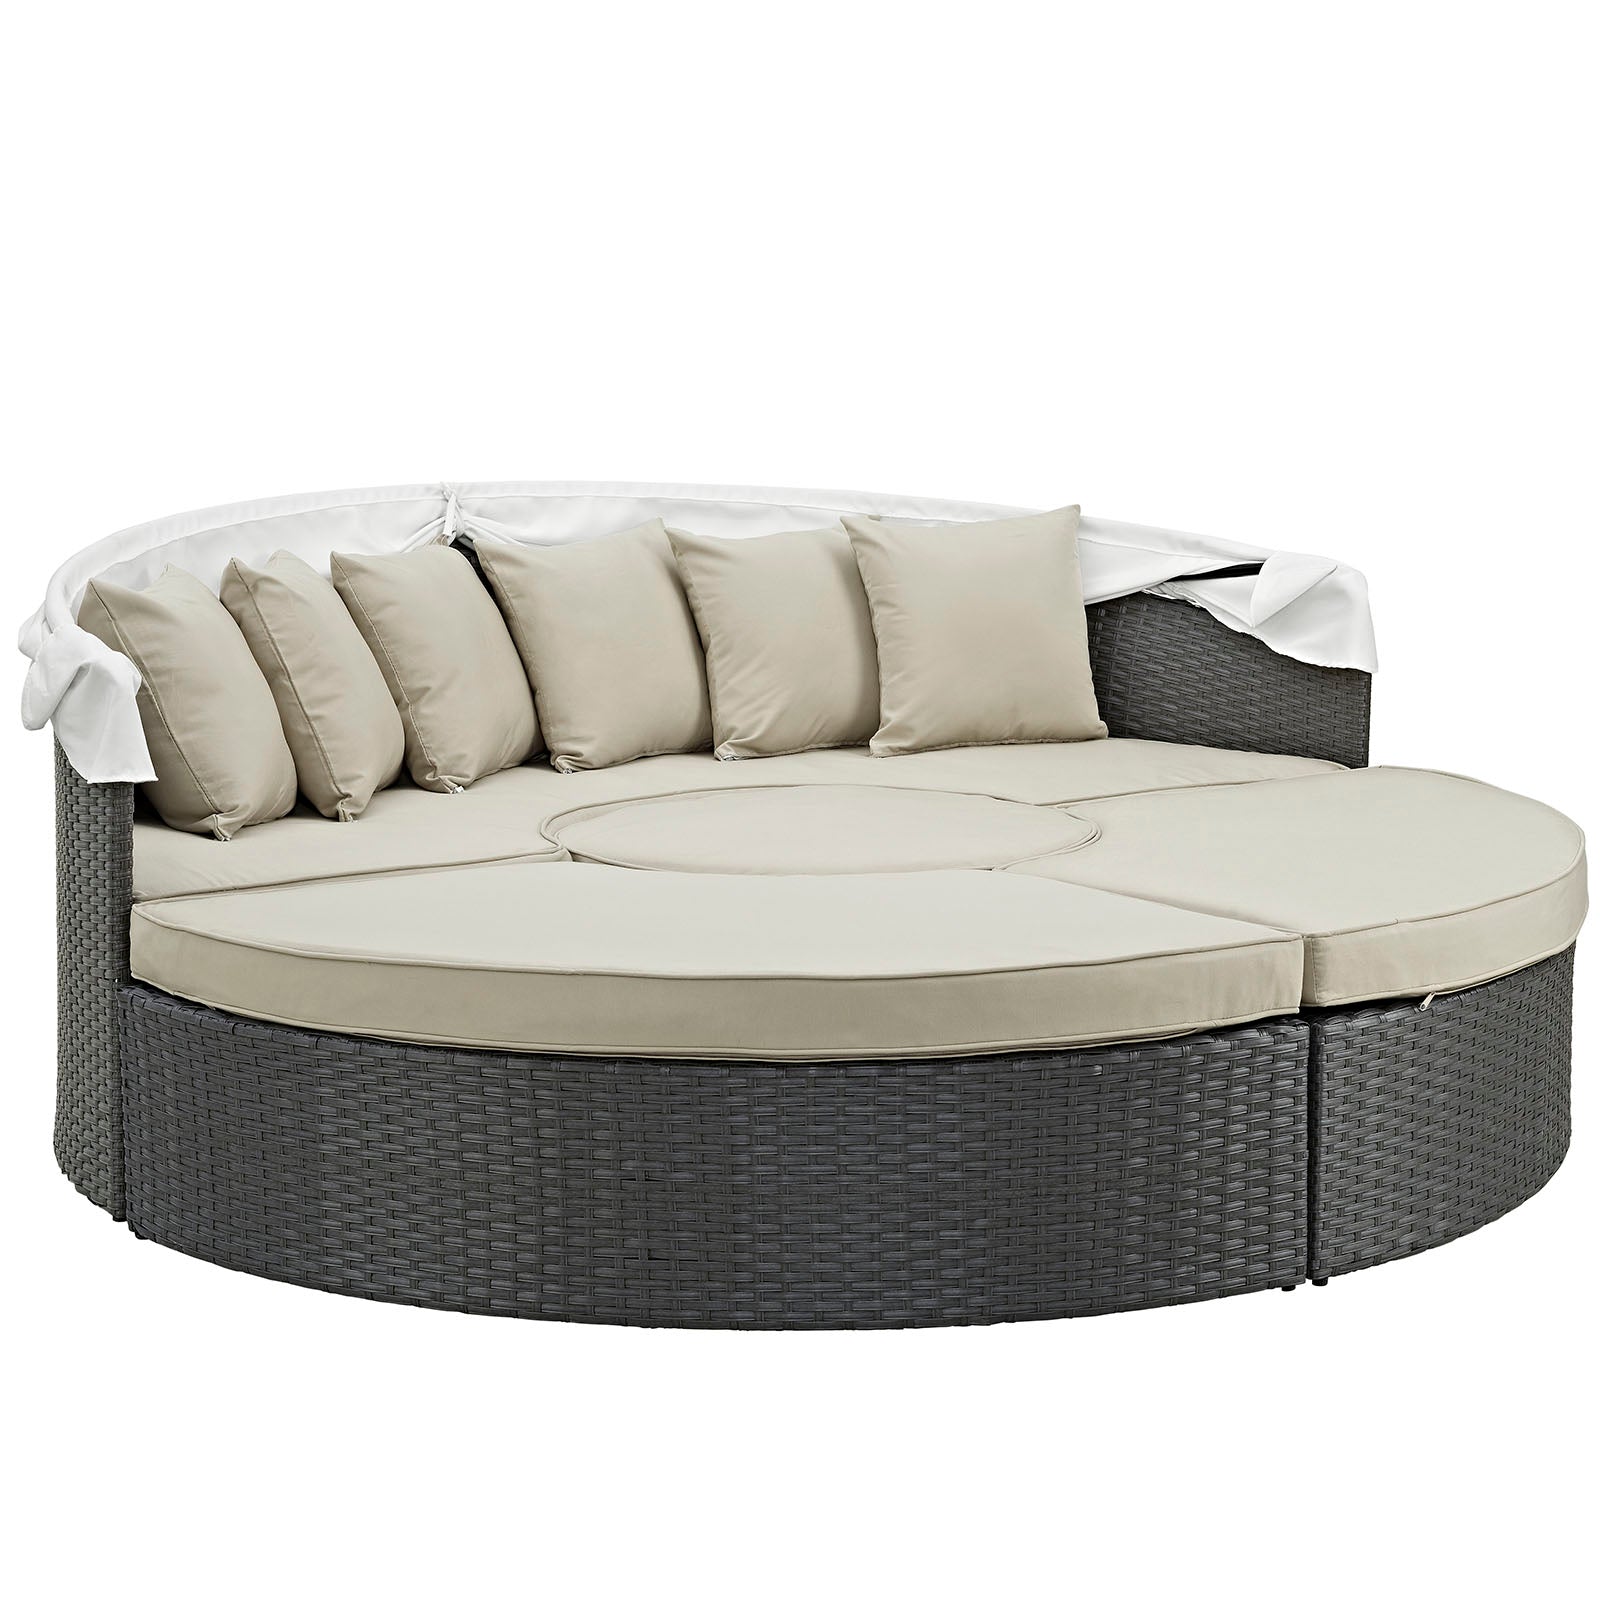 Modway Patio Daybeds - Sojourn Outdoor Patio Sunbrella 86.5"W Daybed Antique Canvas Beige